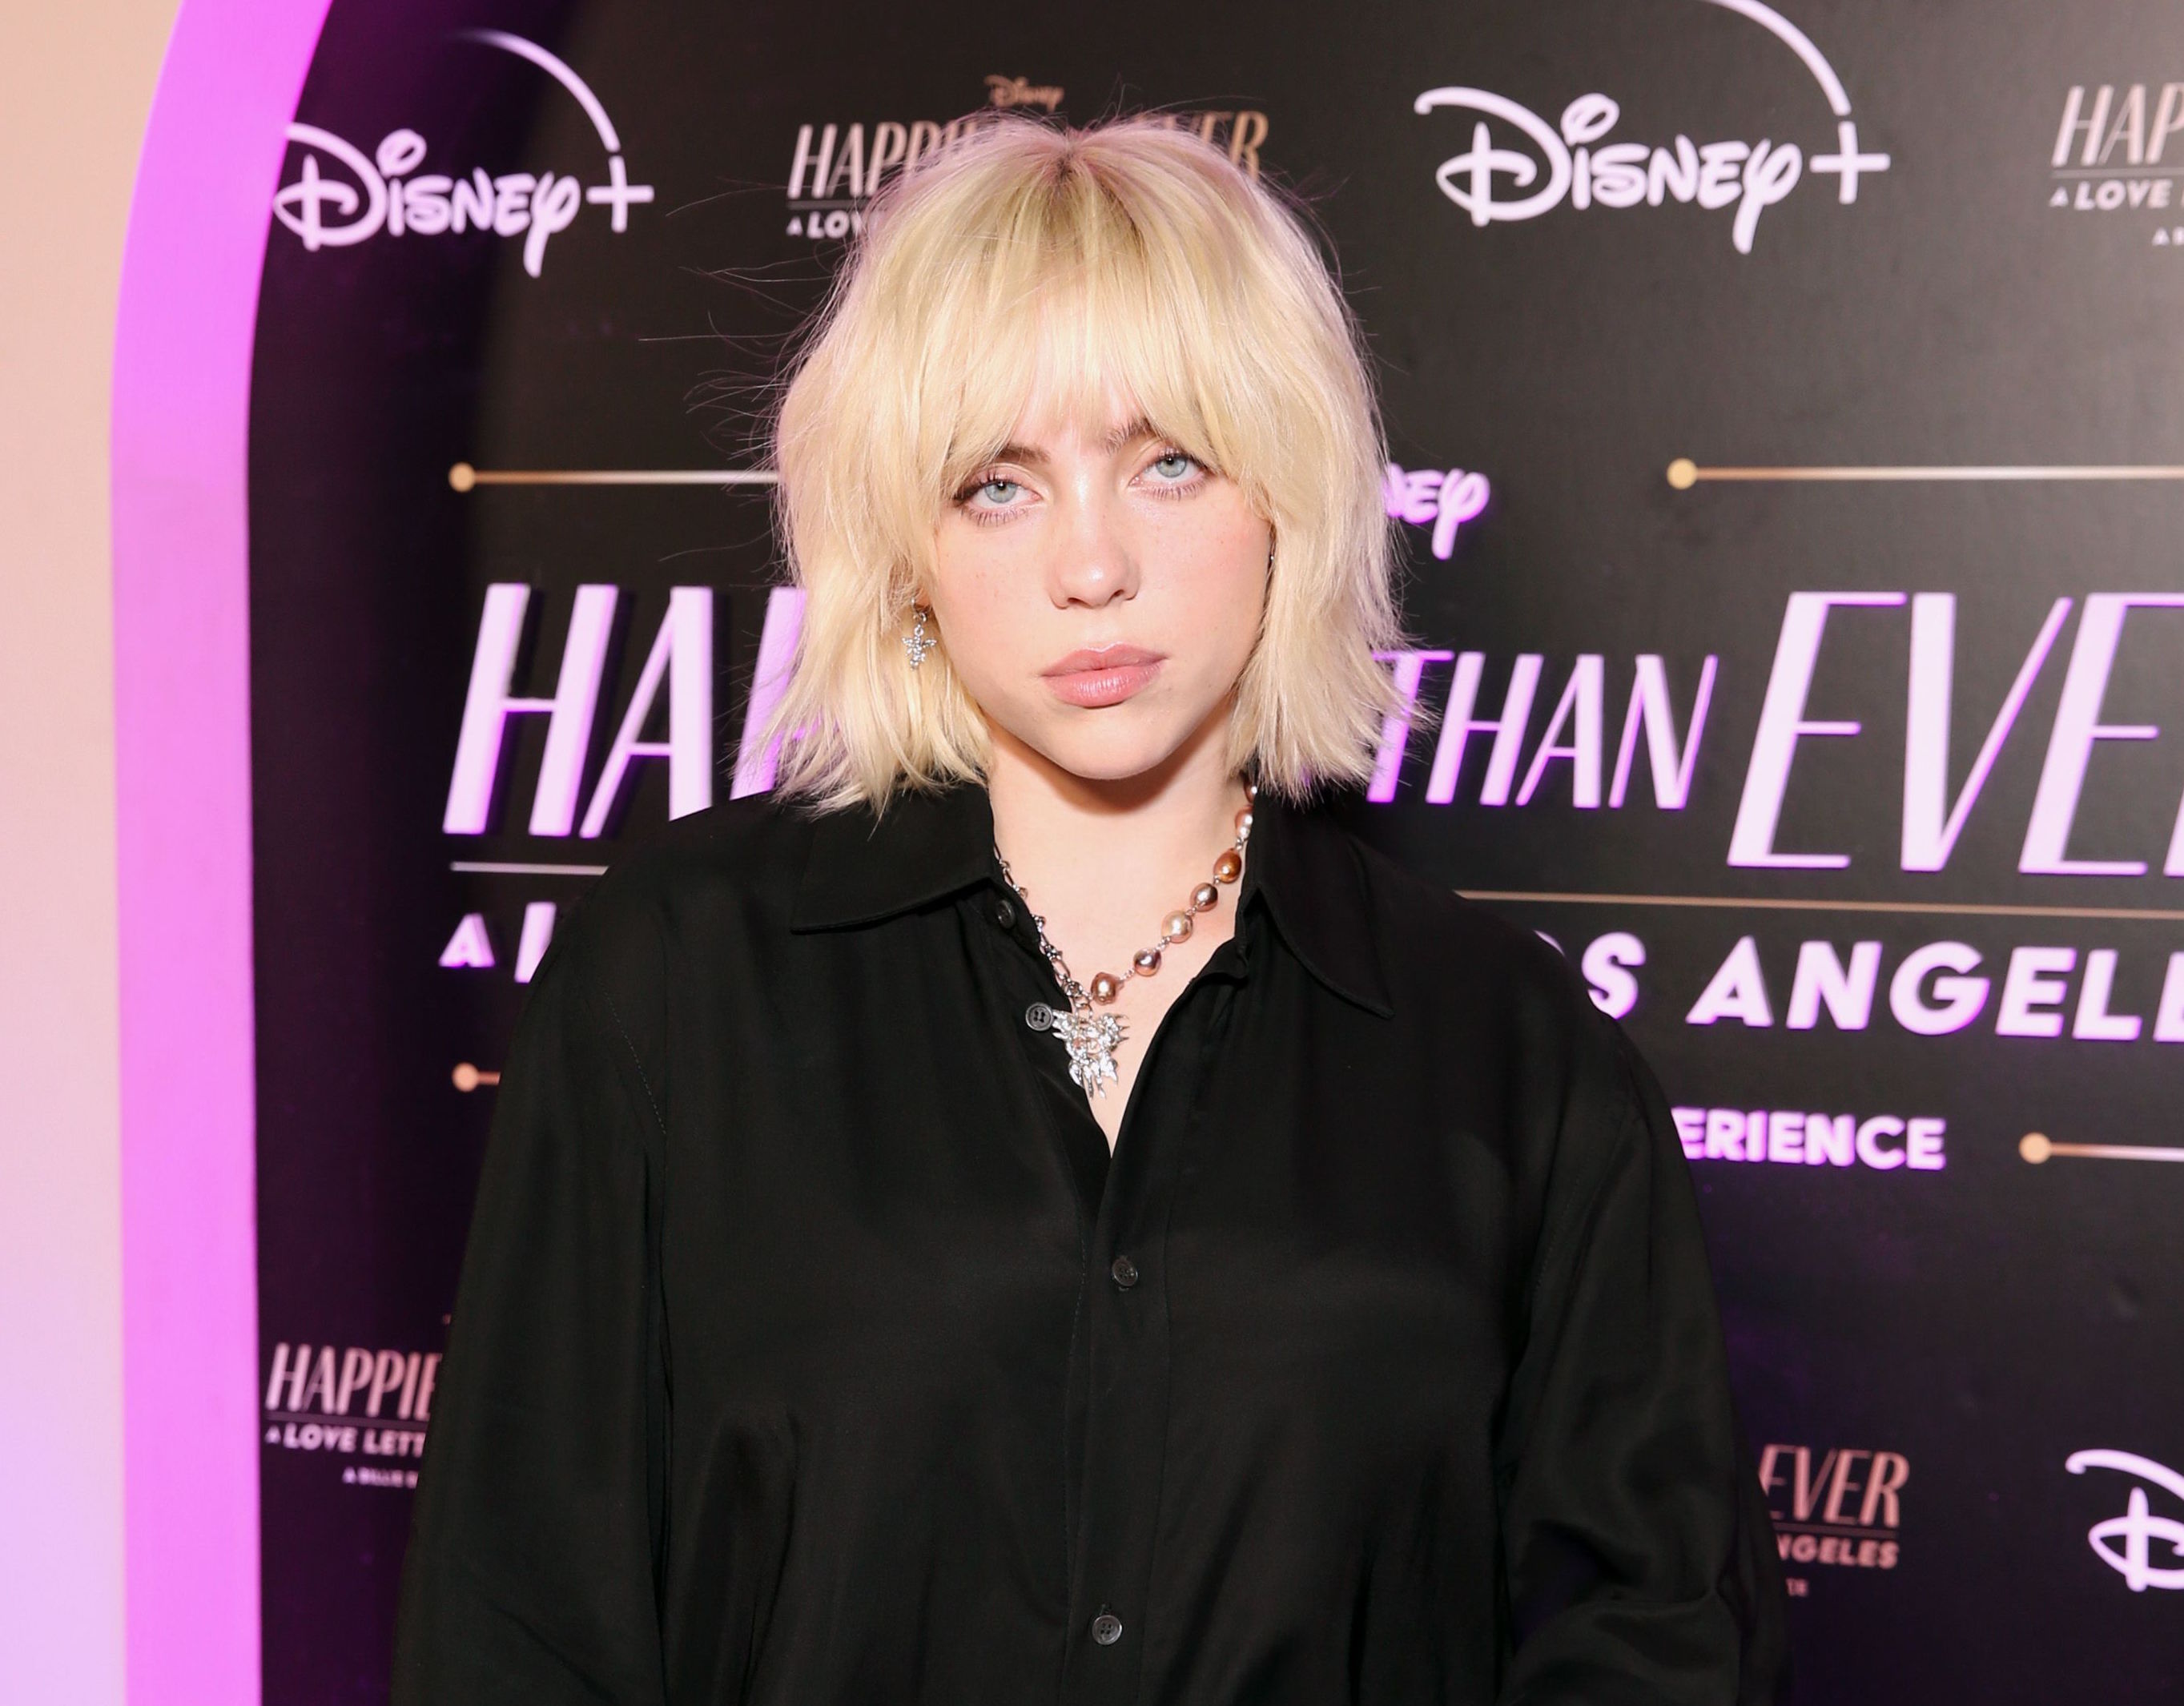 Billie Eilish attends "Happier Than Ever: A Love Letter To Los Angeles" Worldwide Premiere at The Grove on August 30, 2021 in Los Angeles, California.